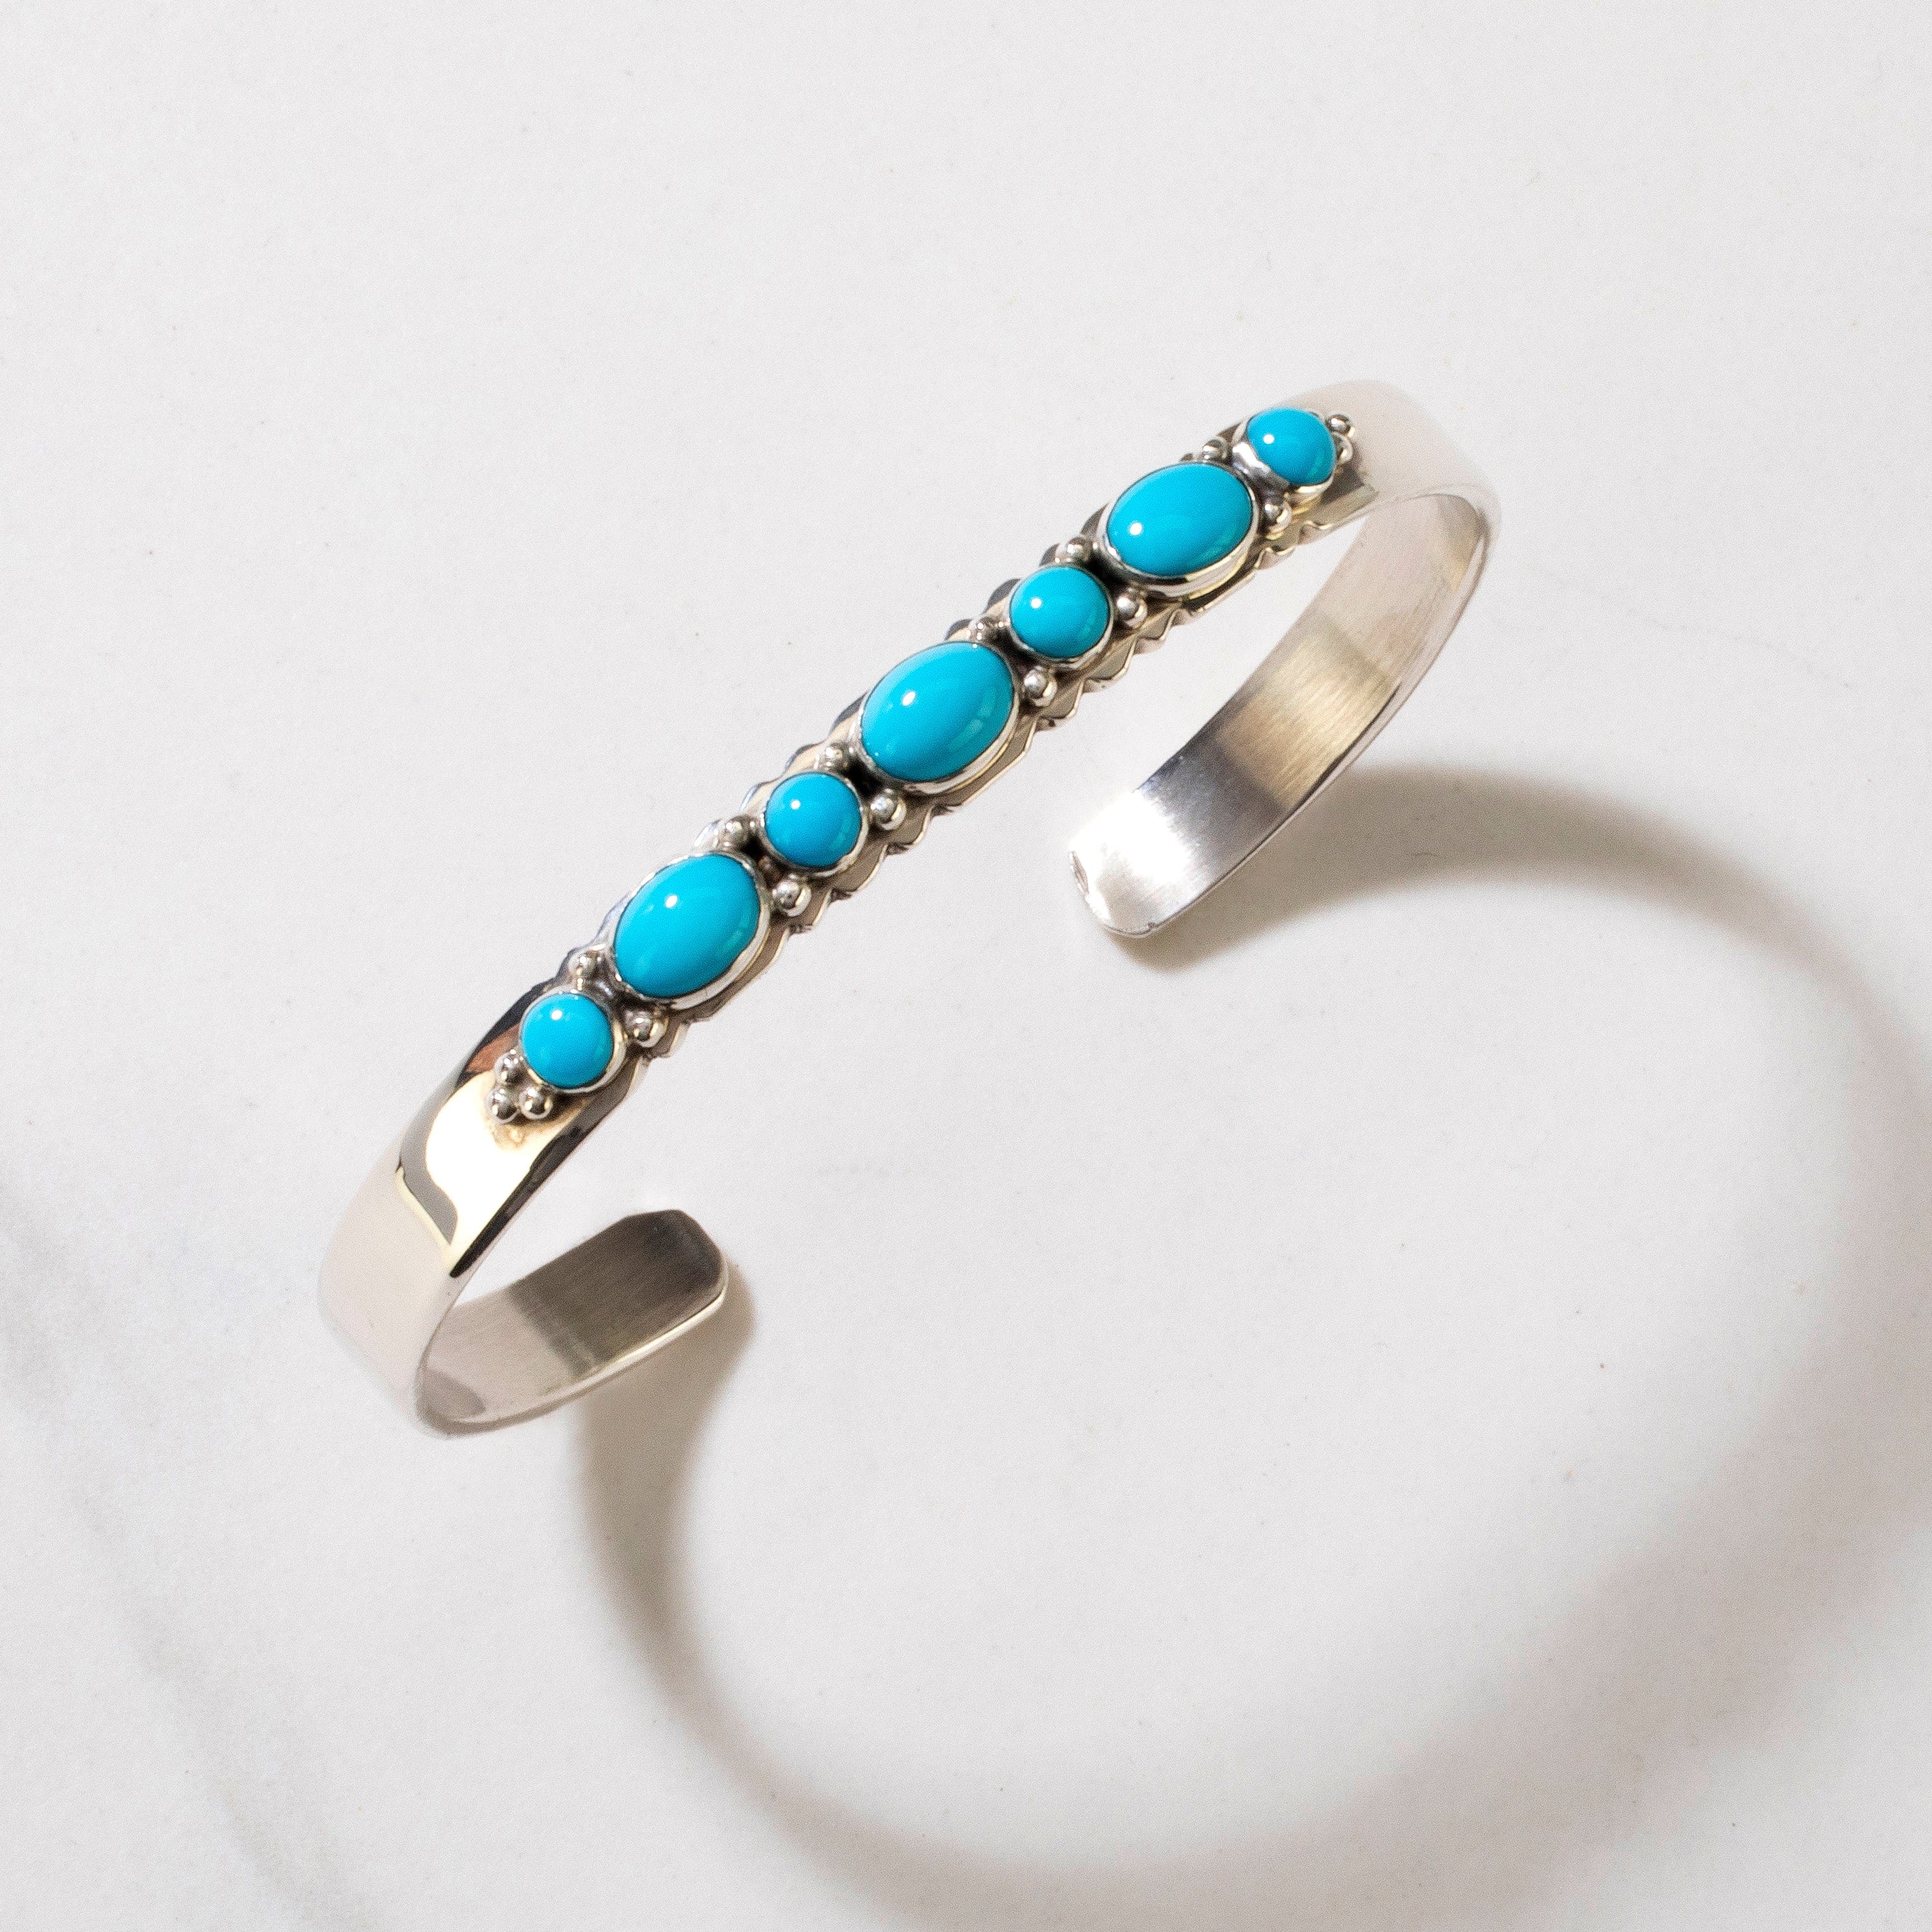 Kalifano Native American Jewelry Patrick Yazzie Sleeping Beauty Turquoise Navajo USA Native American Made 925 Sterling Silver Cuff NAB700.003